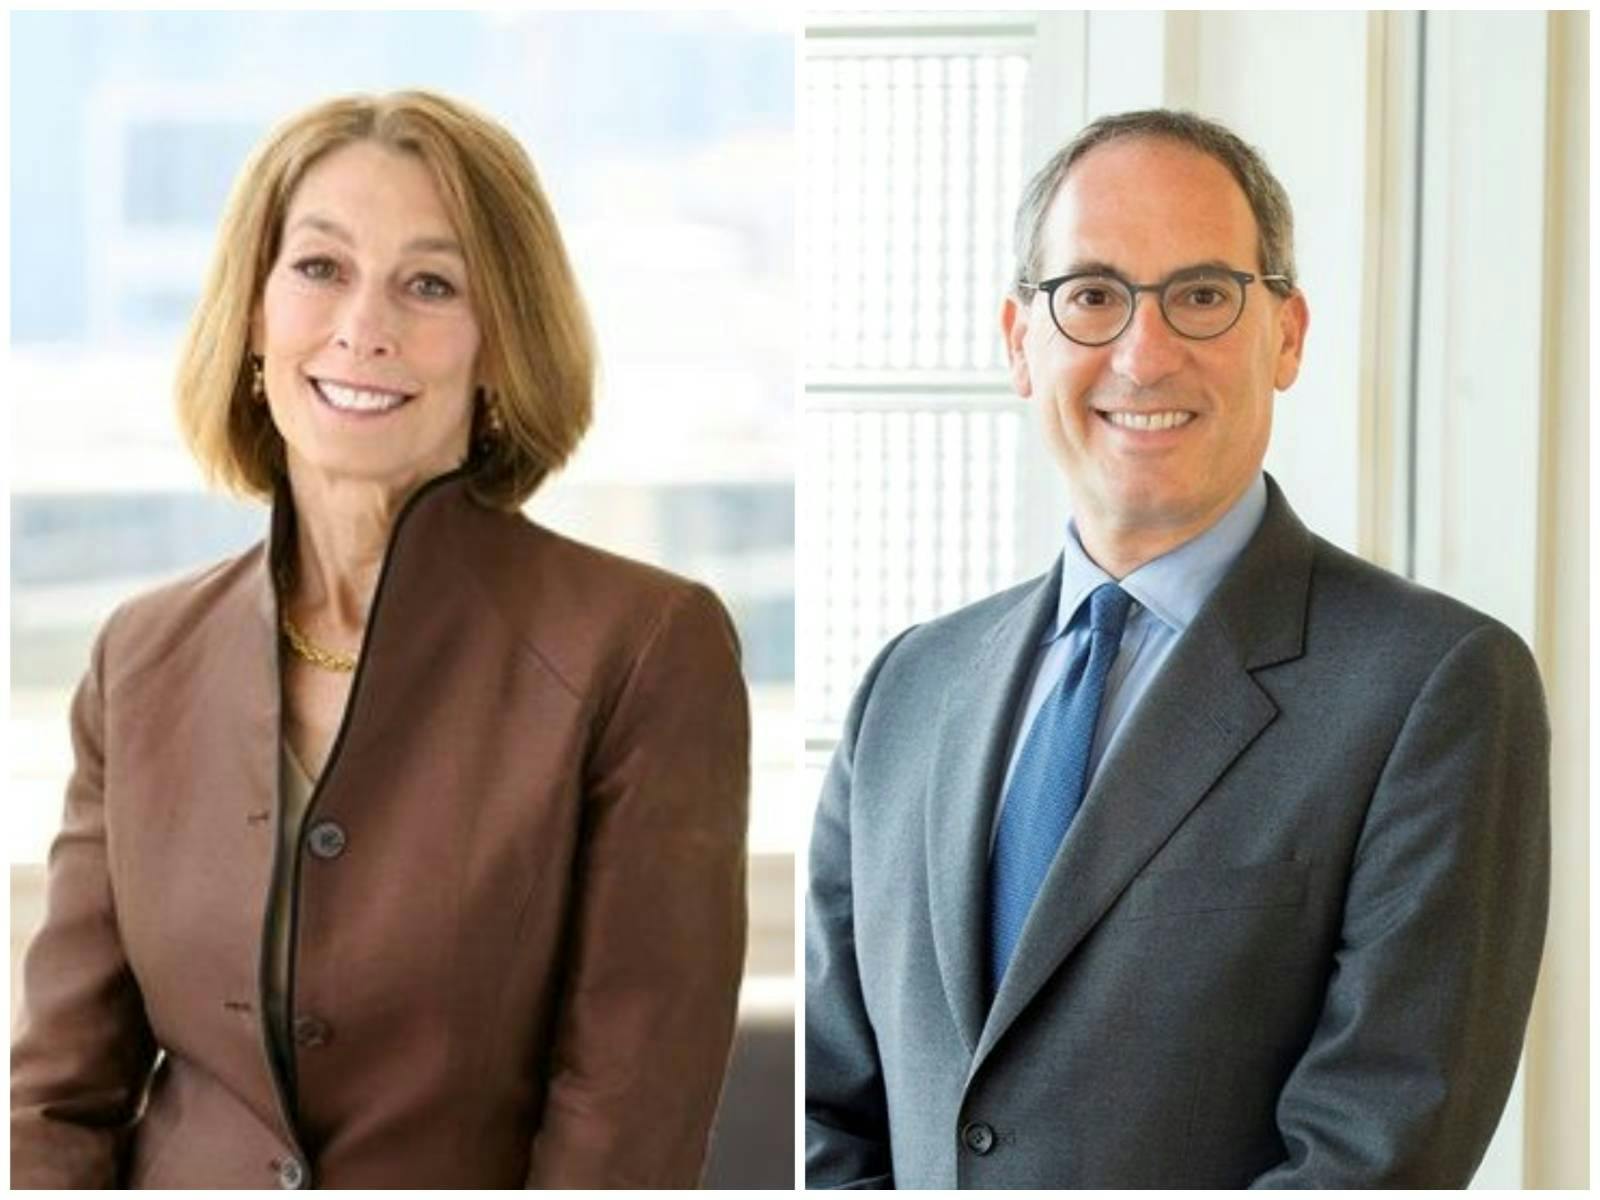 Laurie H. Glimcher, president and CEO of Dana-Farber, and Kevin Tabb, president and CEO of Beth Israel Lahey Health, tout their plans to build a new cancer hospital in Boston. (Photos courtesy of Dana-Farber)